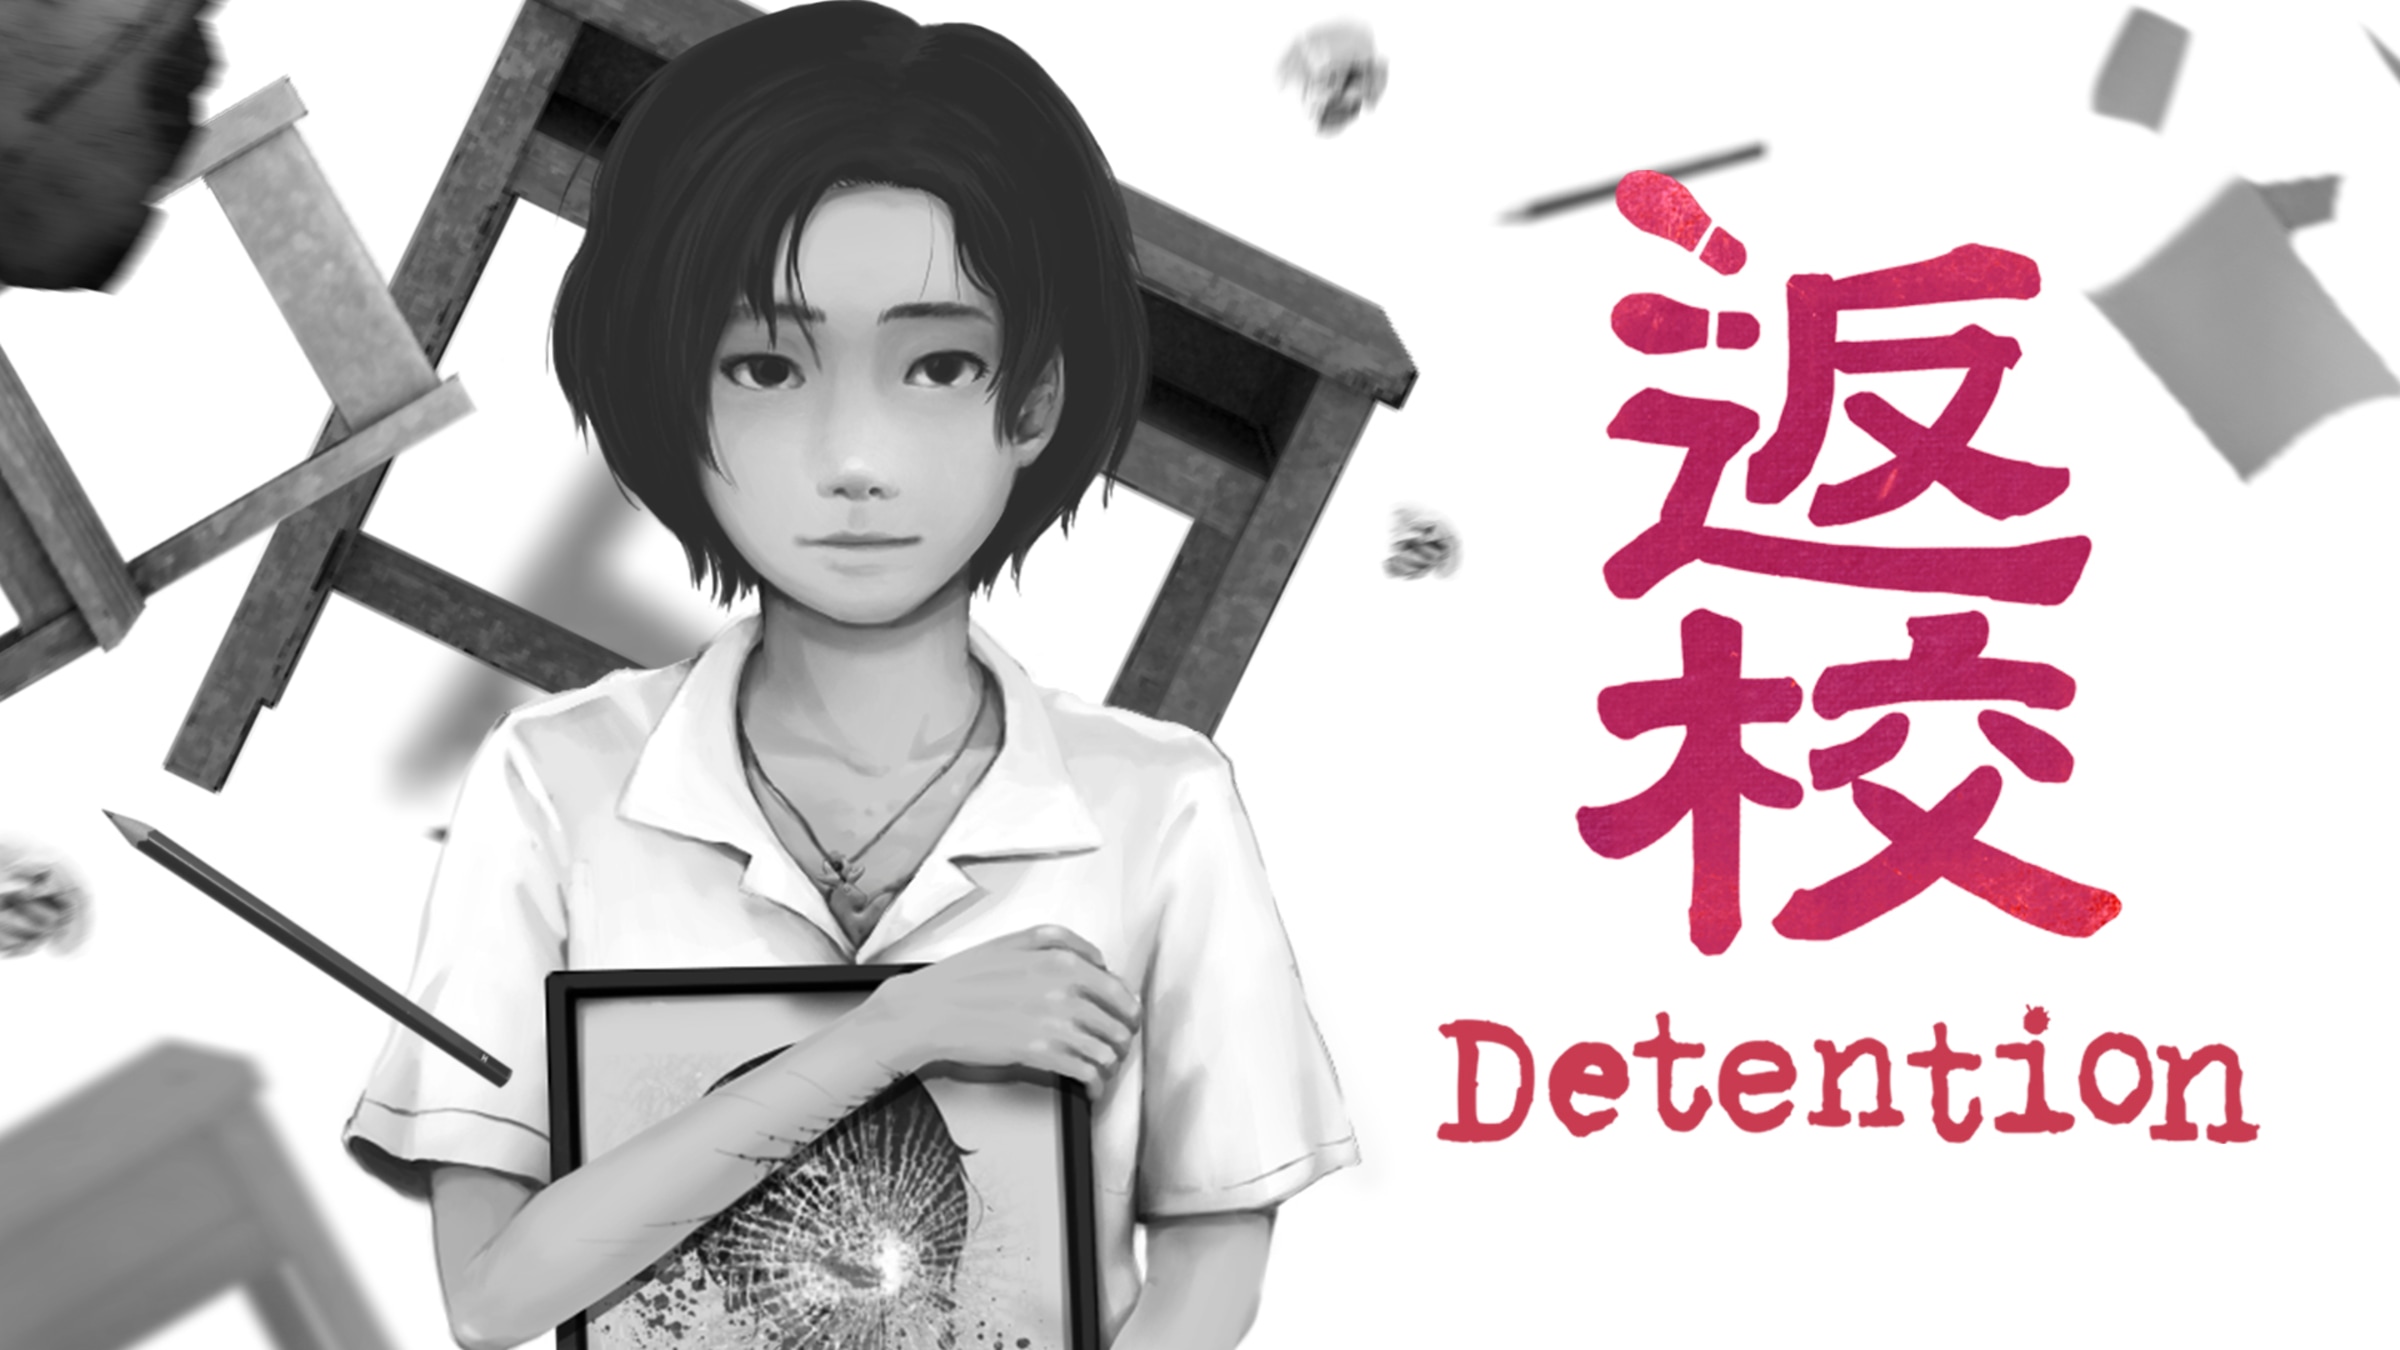 Detention for Nintendo Switch - Official Nintendo Site